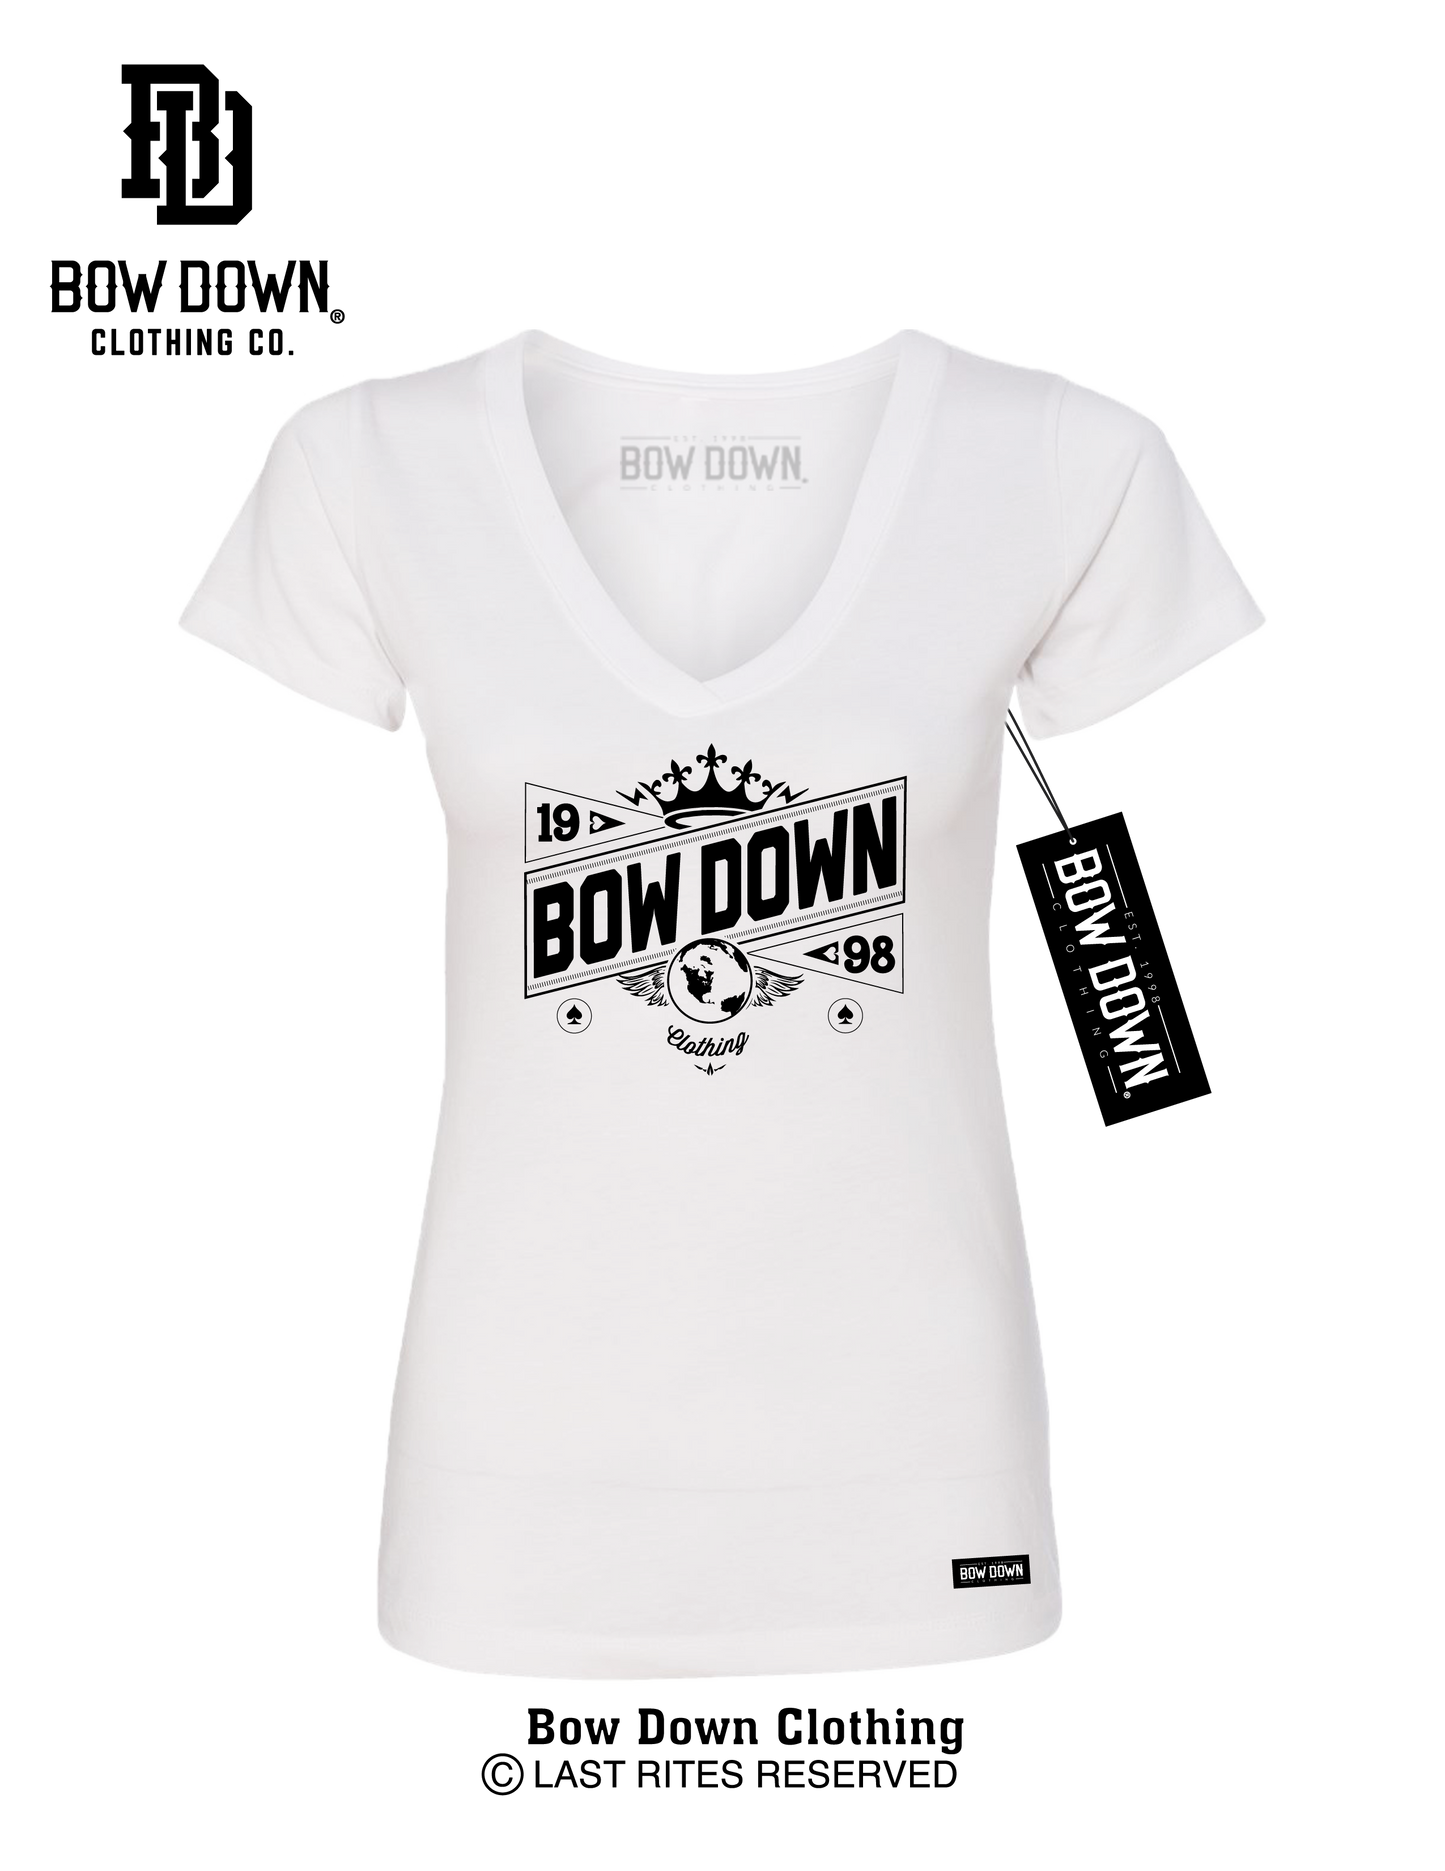 BOW DOWN CROWN 2 WOMEN'S V-NECK